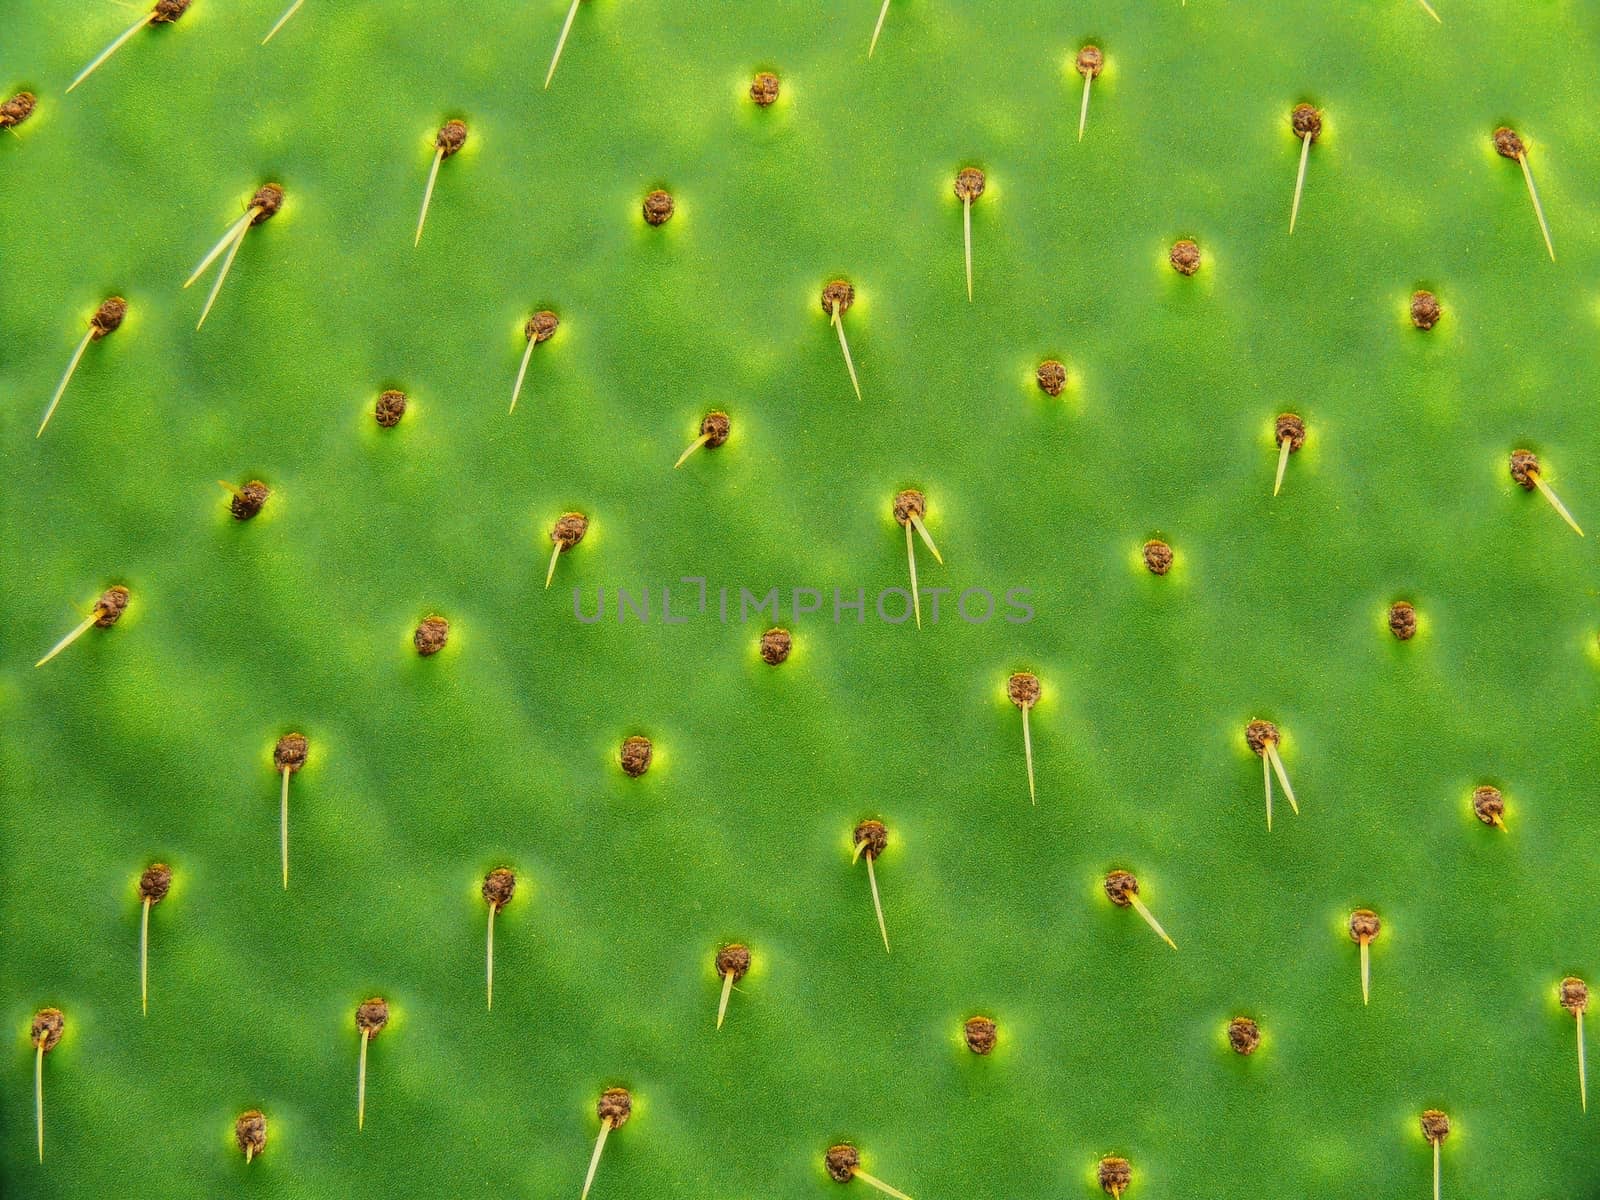 close-up of green cactus leaf with thorns